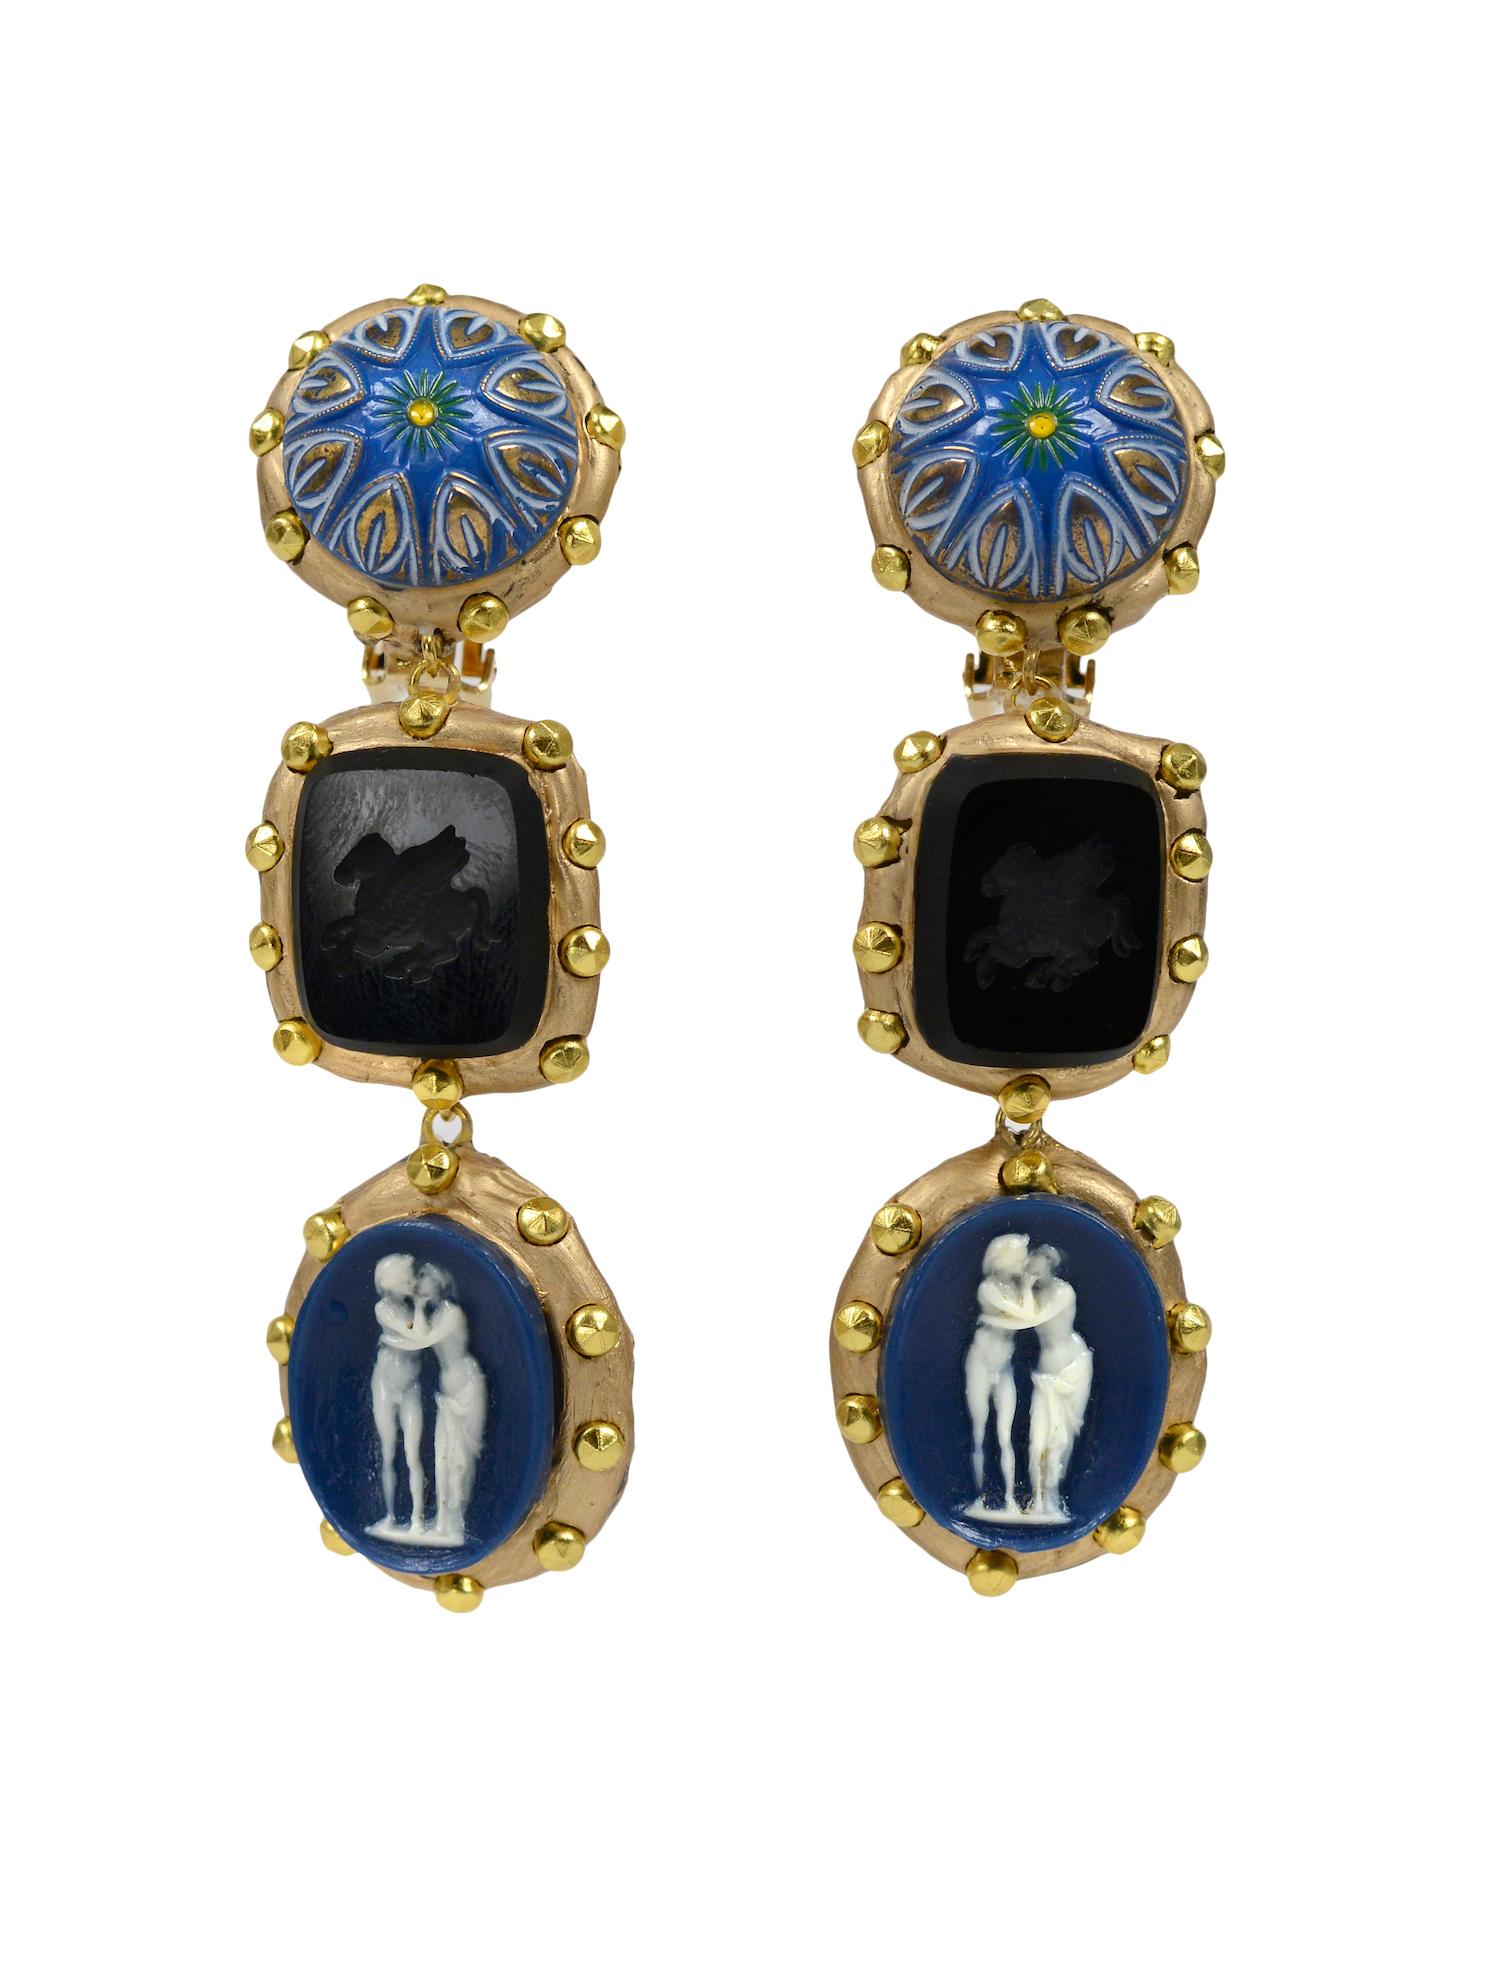 Handmade one-of-a-kind Richard Minadeo blue enamel and cameo drop clip earrings that feature vintage black and blue cameo charms set in gold resin with studs.

We are pleased to announce Resurrected: Richard Minadeo and the art of Memento Mori: